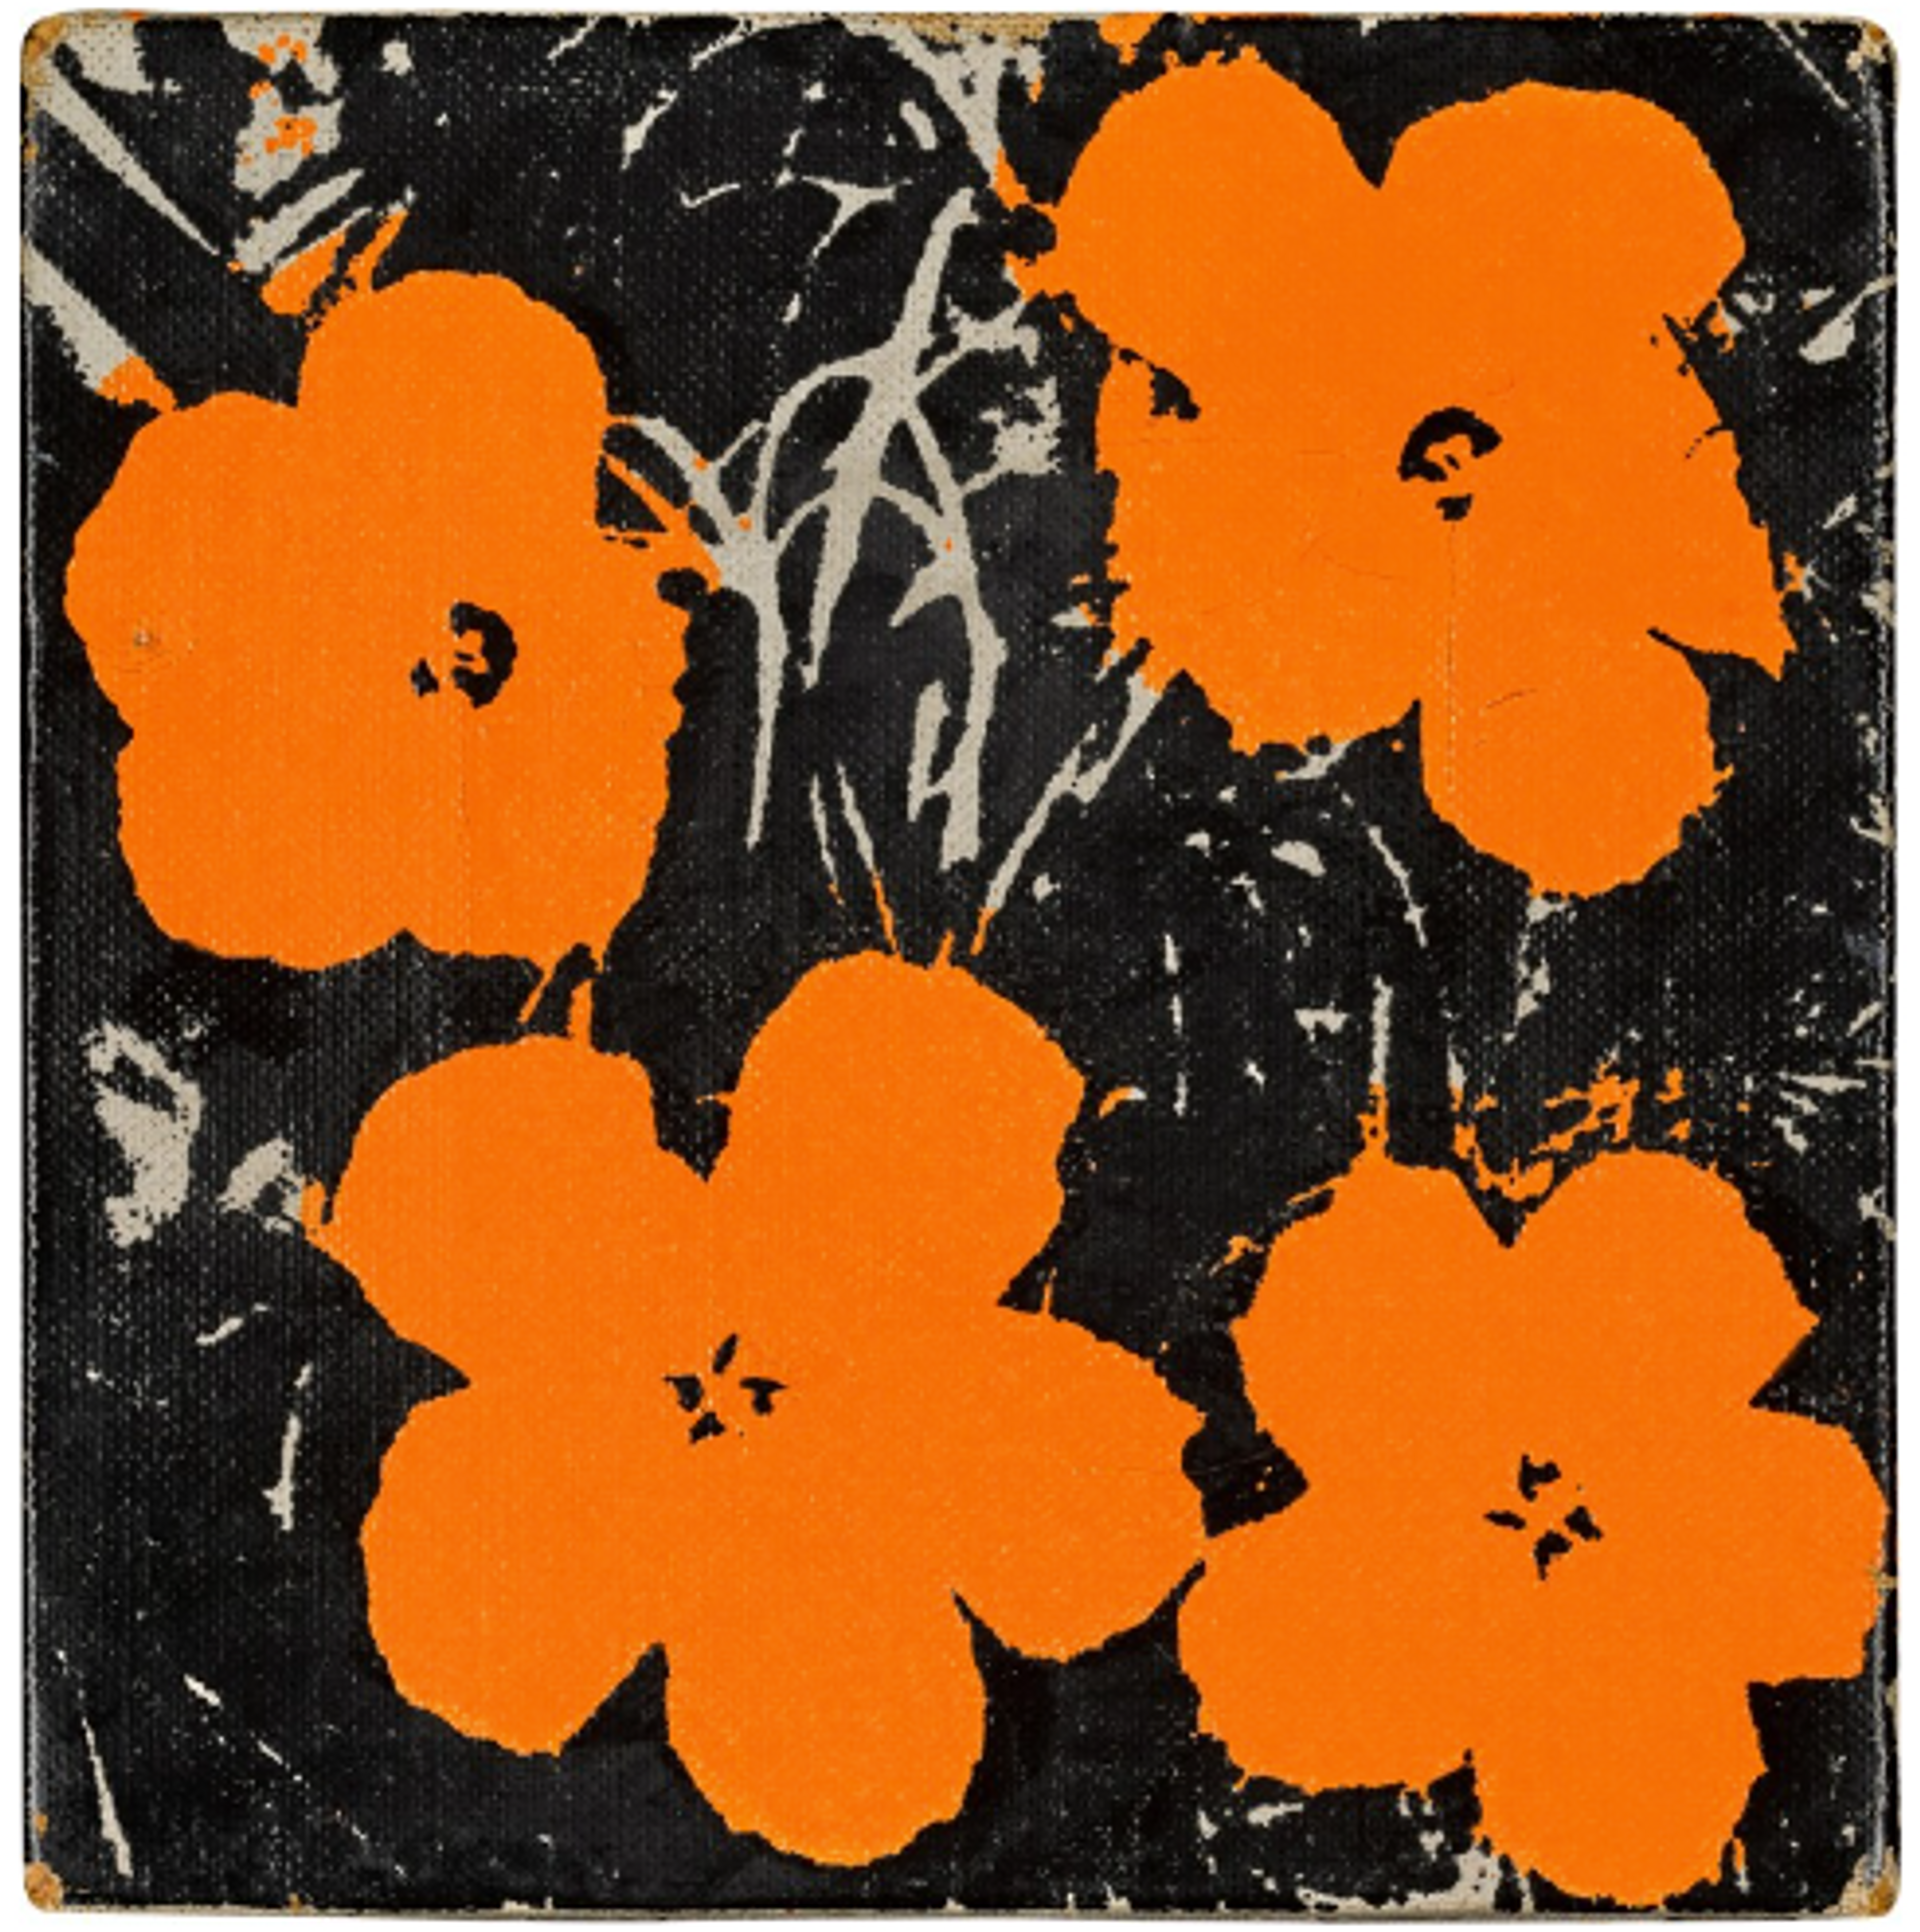 Flowers - by Andy Warhol